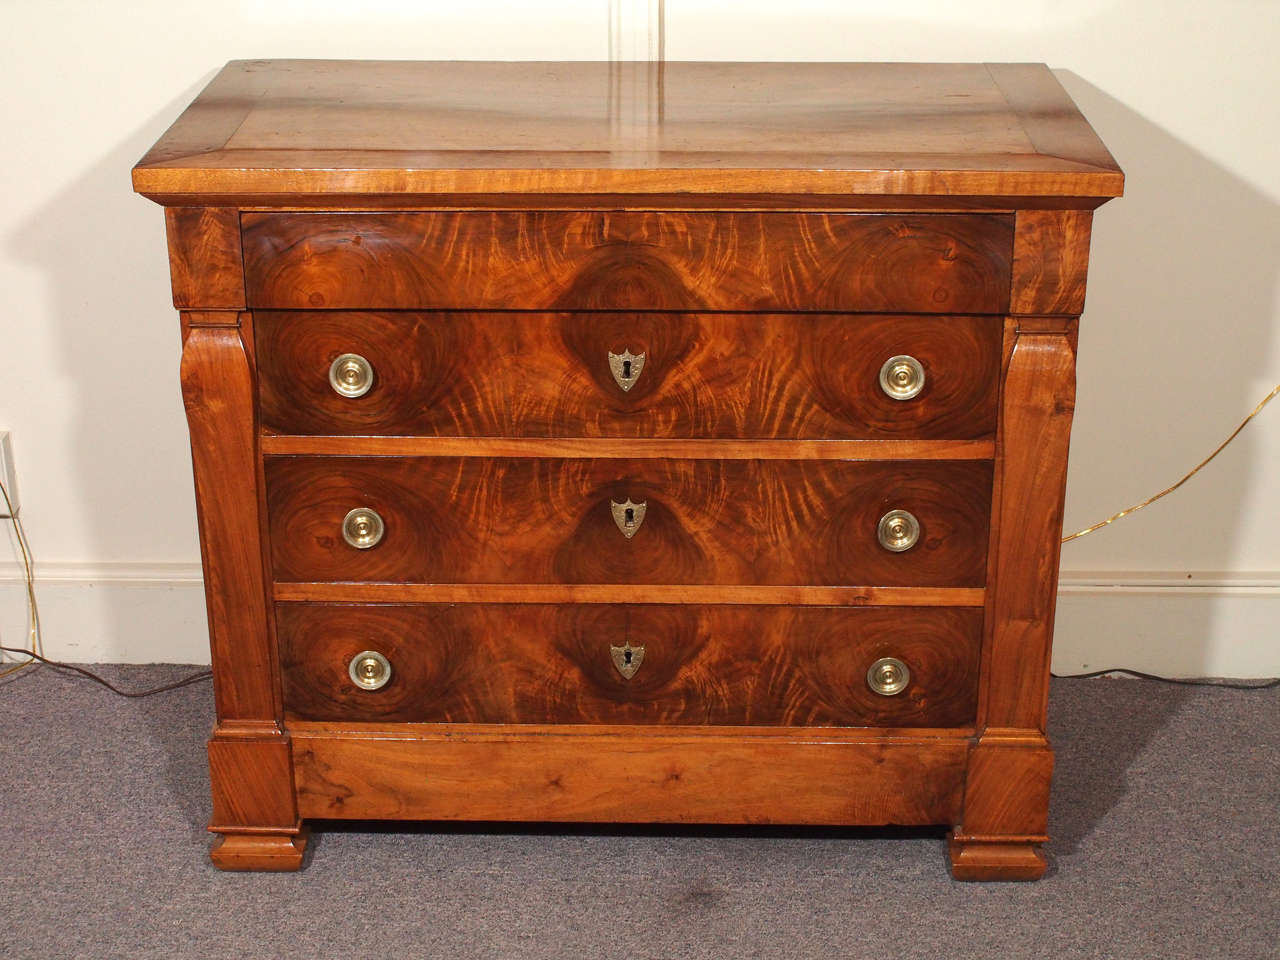 Early 19th century French walnut commode-period restauration.